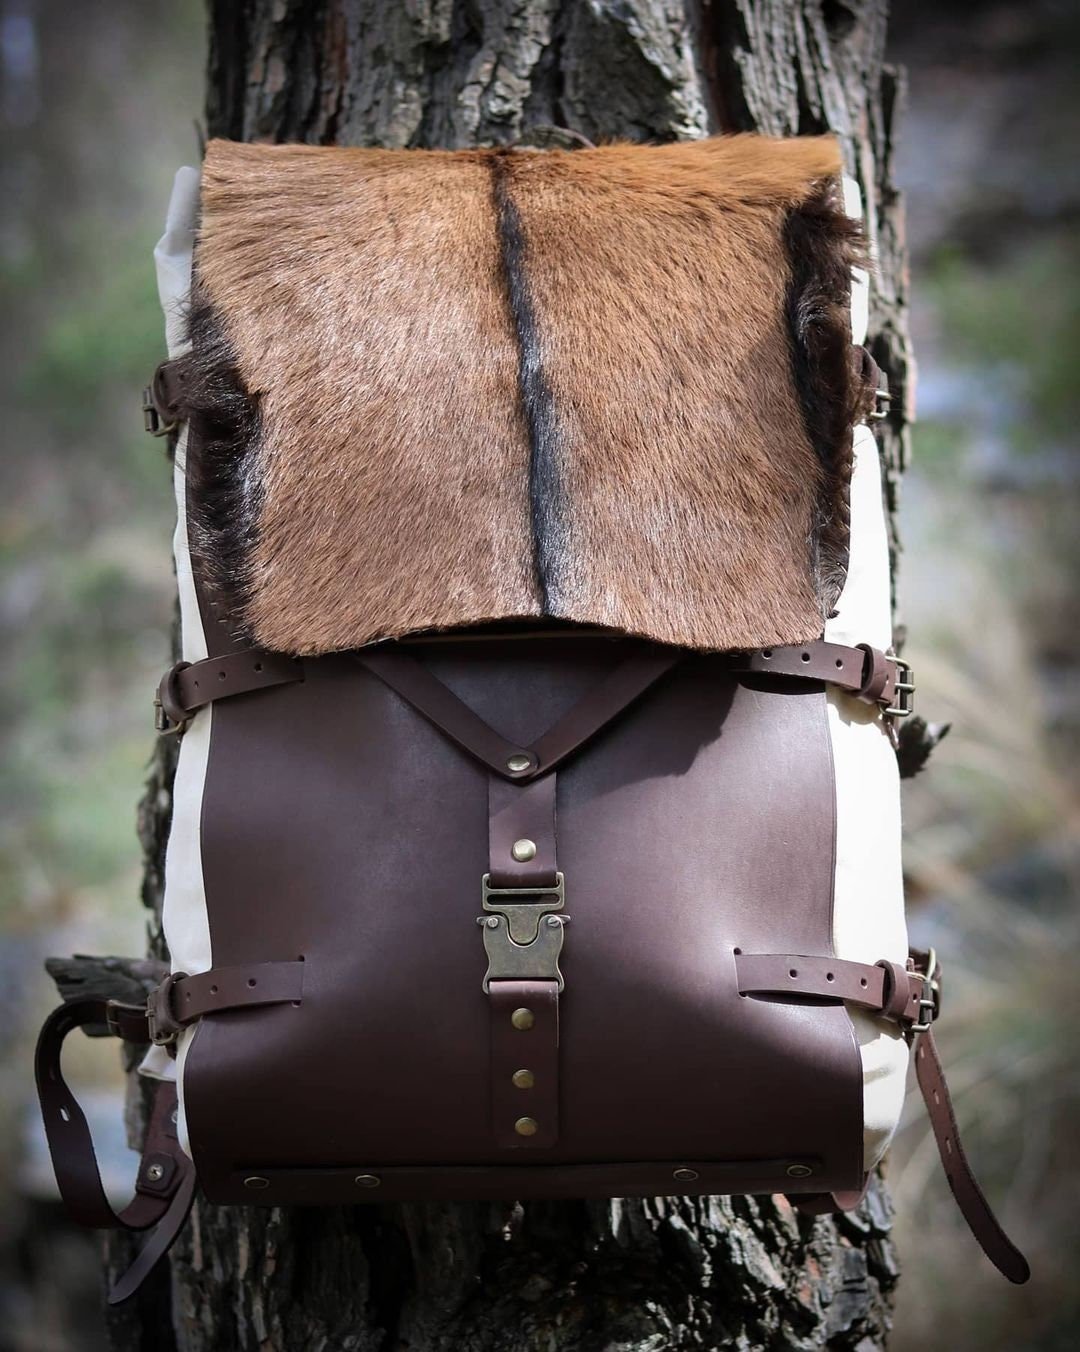 Handmade Leather Backpack | Leather Rucksack | Goat Fur | Waxed Canvas Waterproof Bag for Travel, Daypack, Hiking | 30,40,50 Litres options bushcraft - camping - hiking backpack 99percenthandmade   